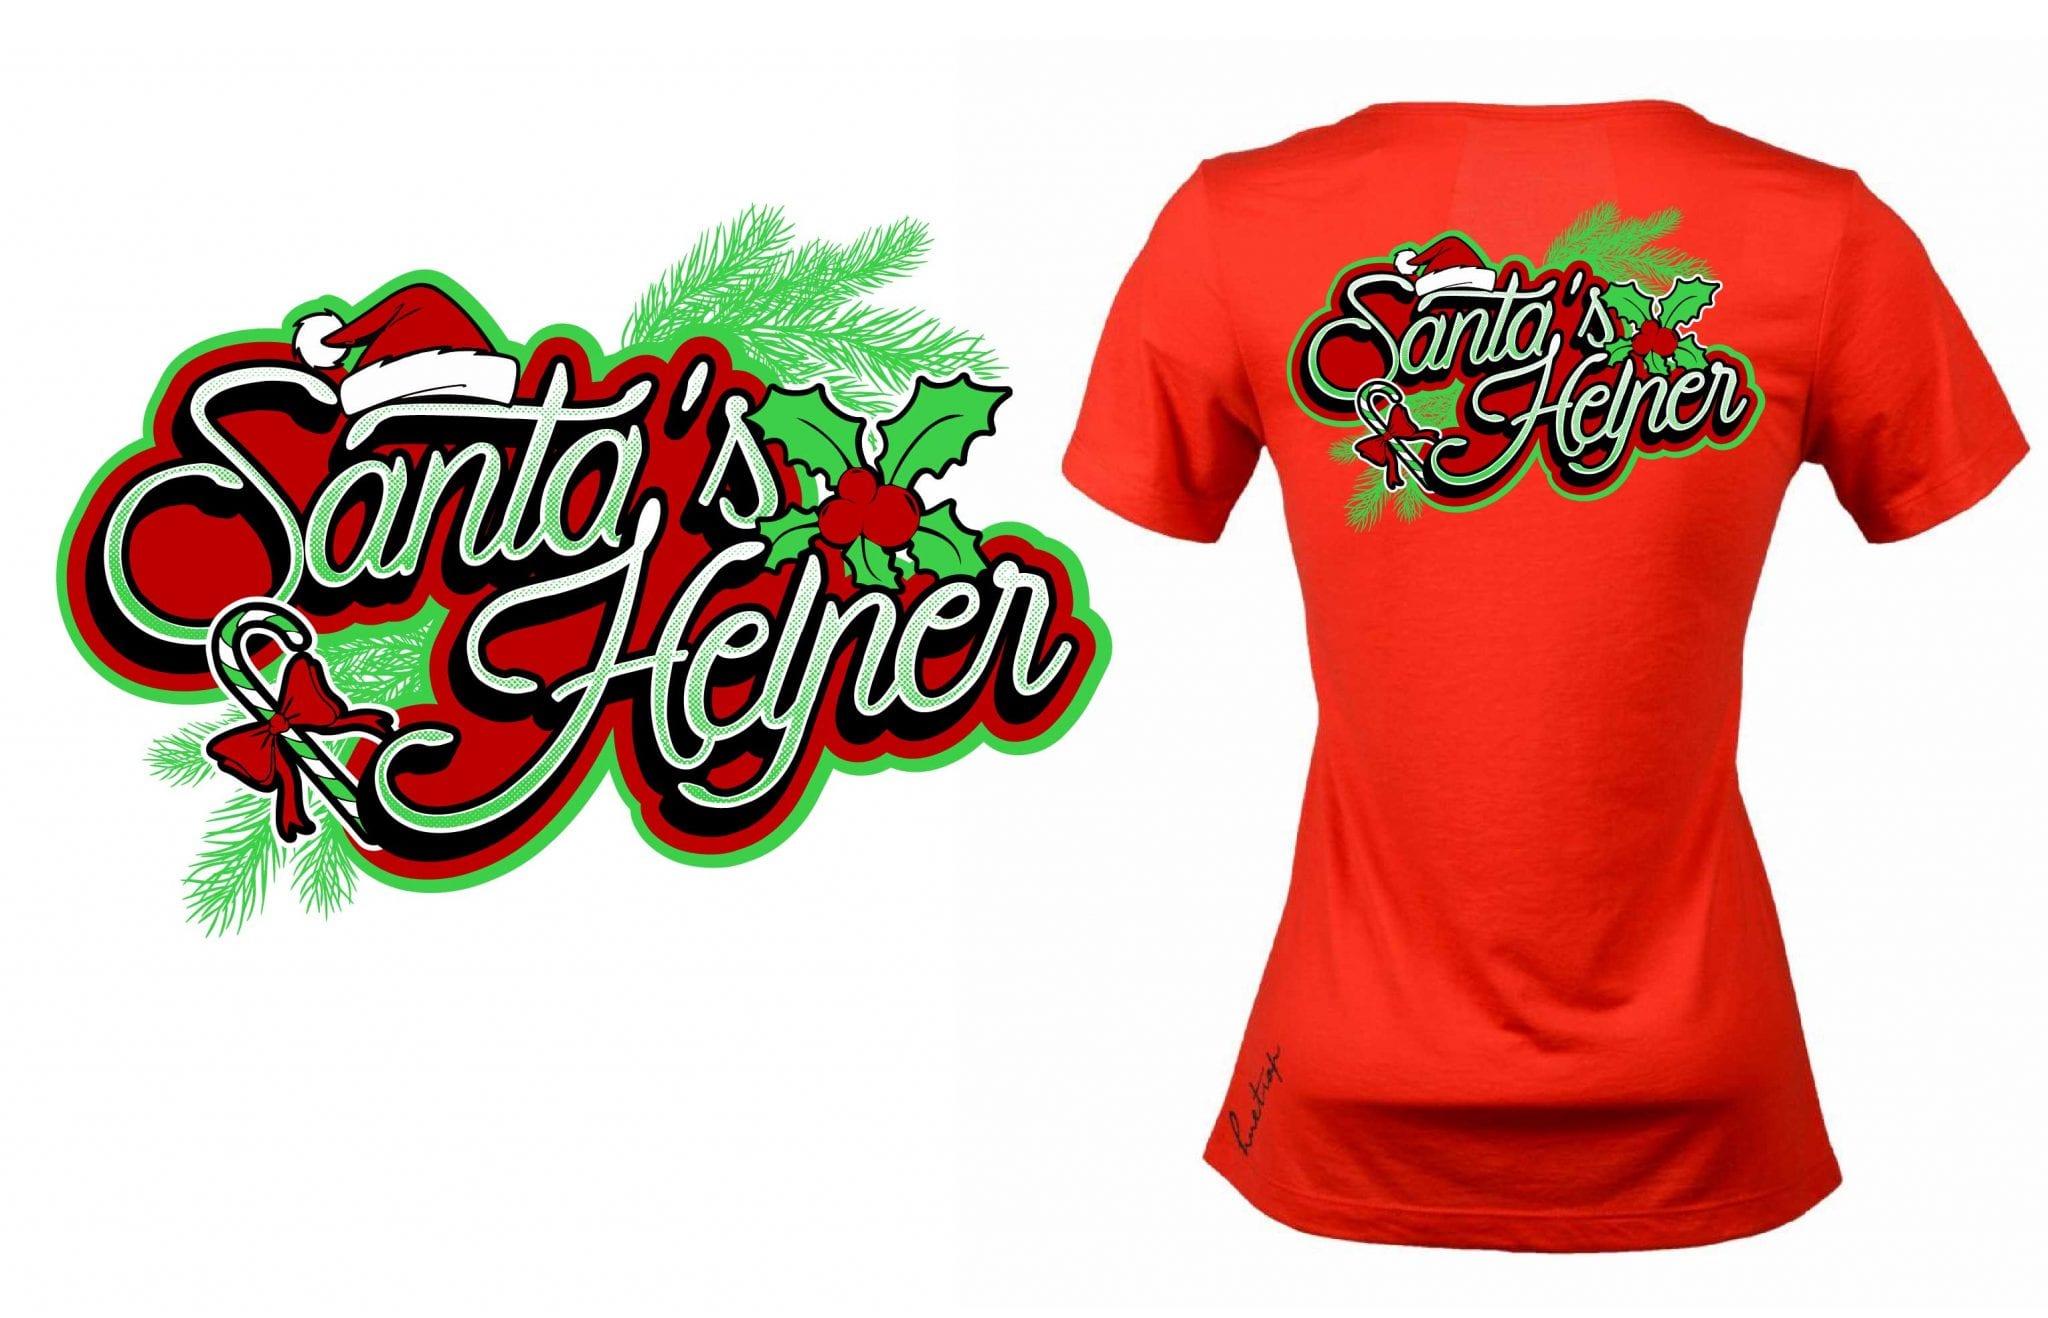 Eyecatching vector logo design for t-shirt for 2015 Holly Feis event